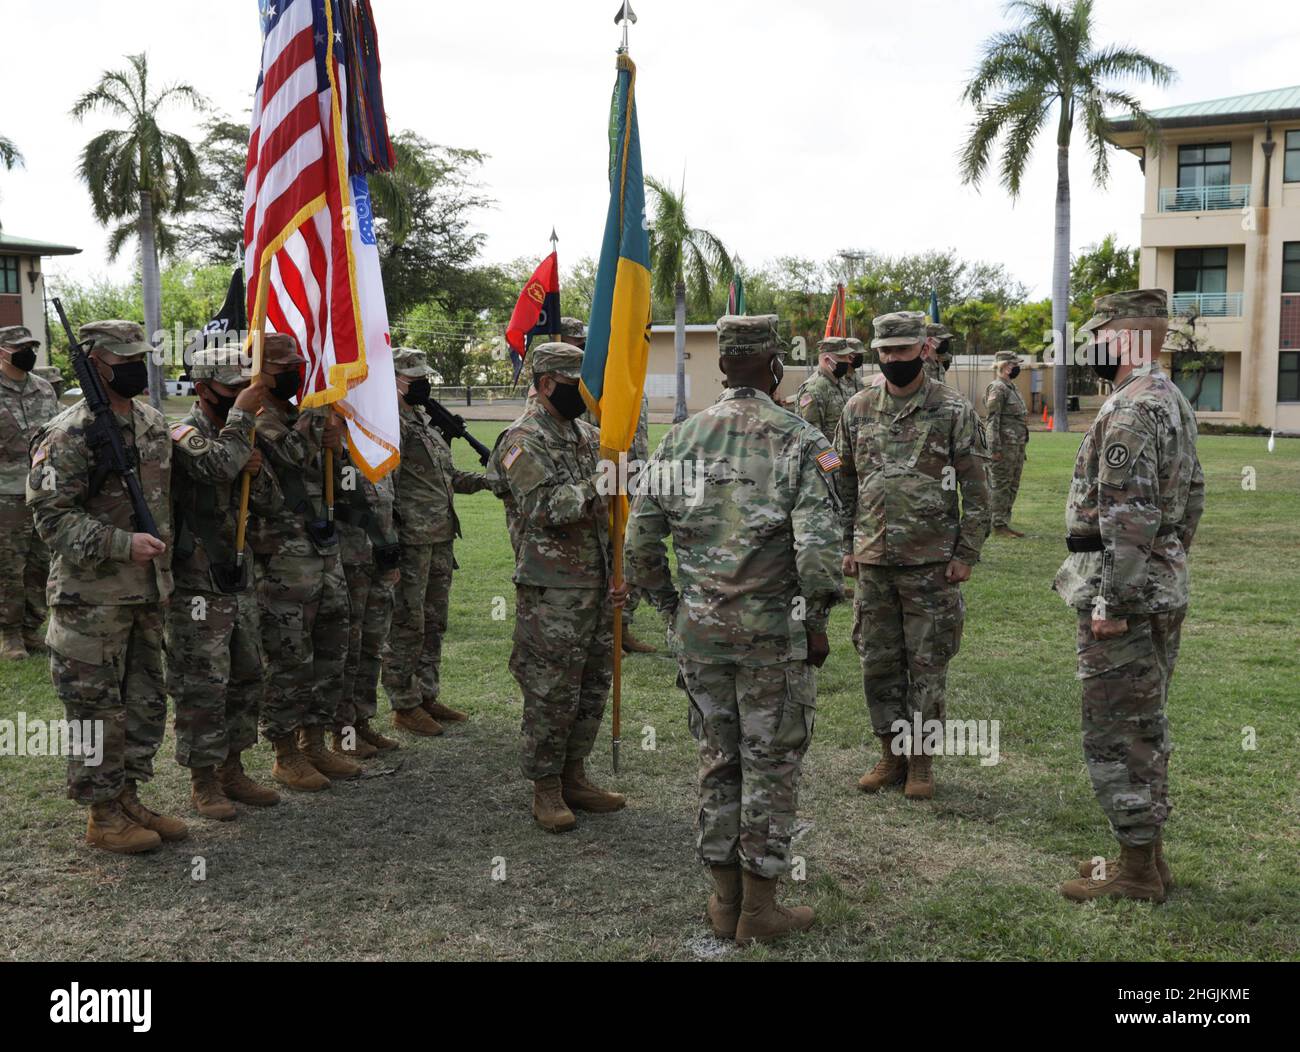 U.S. Army Reserve soldiers from the 303rd Maneuver Enhancement Brigade stand at attention on August 22 2021, at Fort Shafter Flats in Honolulu.  The 303rd MEB provides Mission Command for Maneuver Support elements in order to ensure freedom of action, mobility, protection and sustainability to supported forces within our assigned area of responsibility. Stock Photo